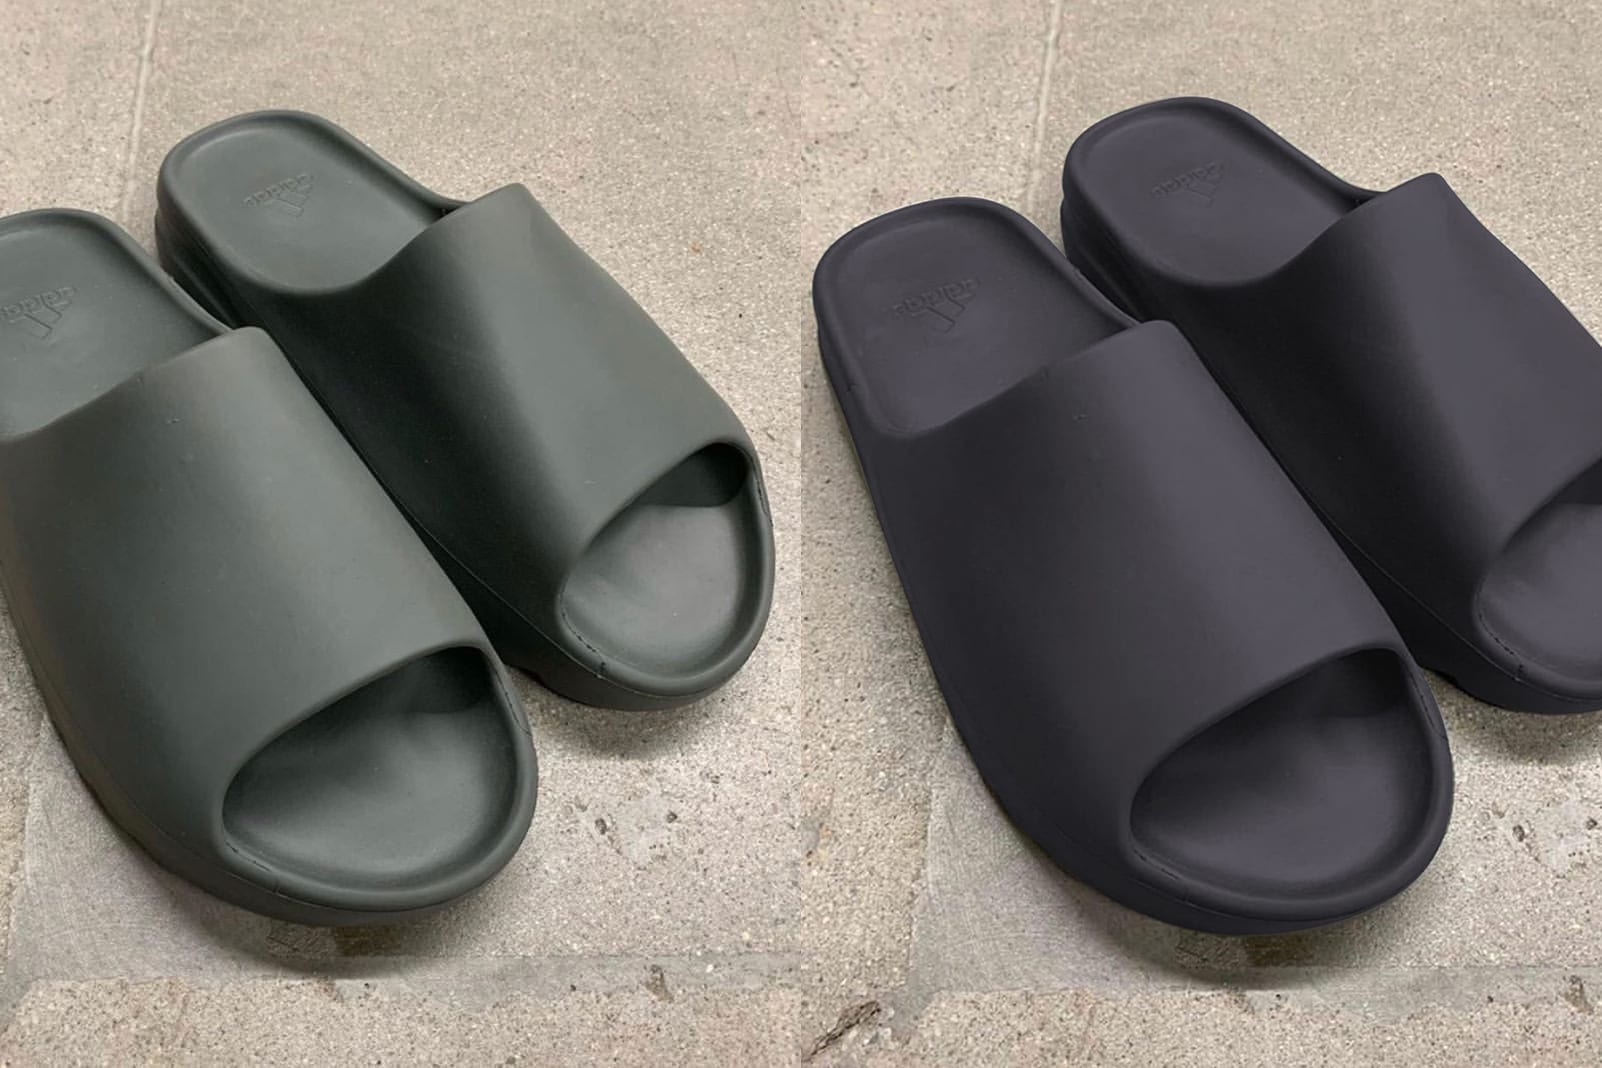 Adidas Yeezy Slides: A revolution in streetwear and comfort